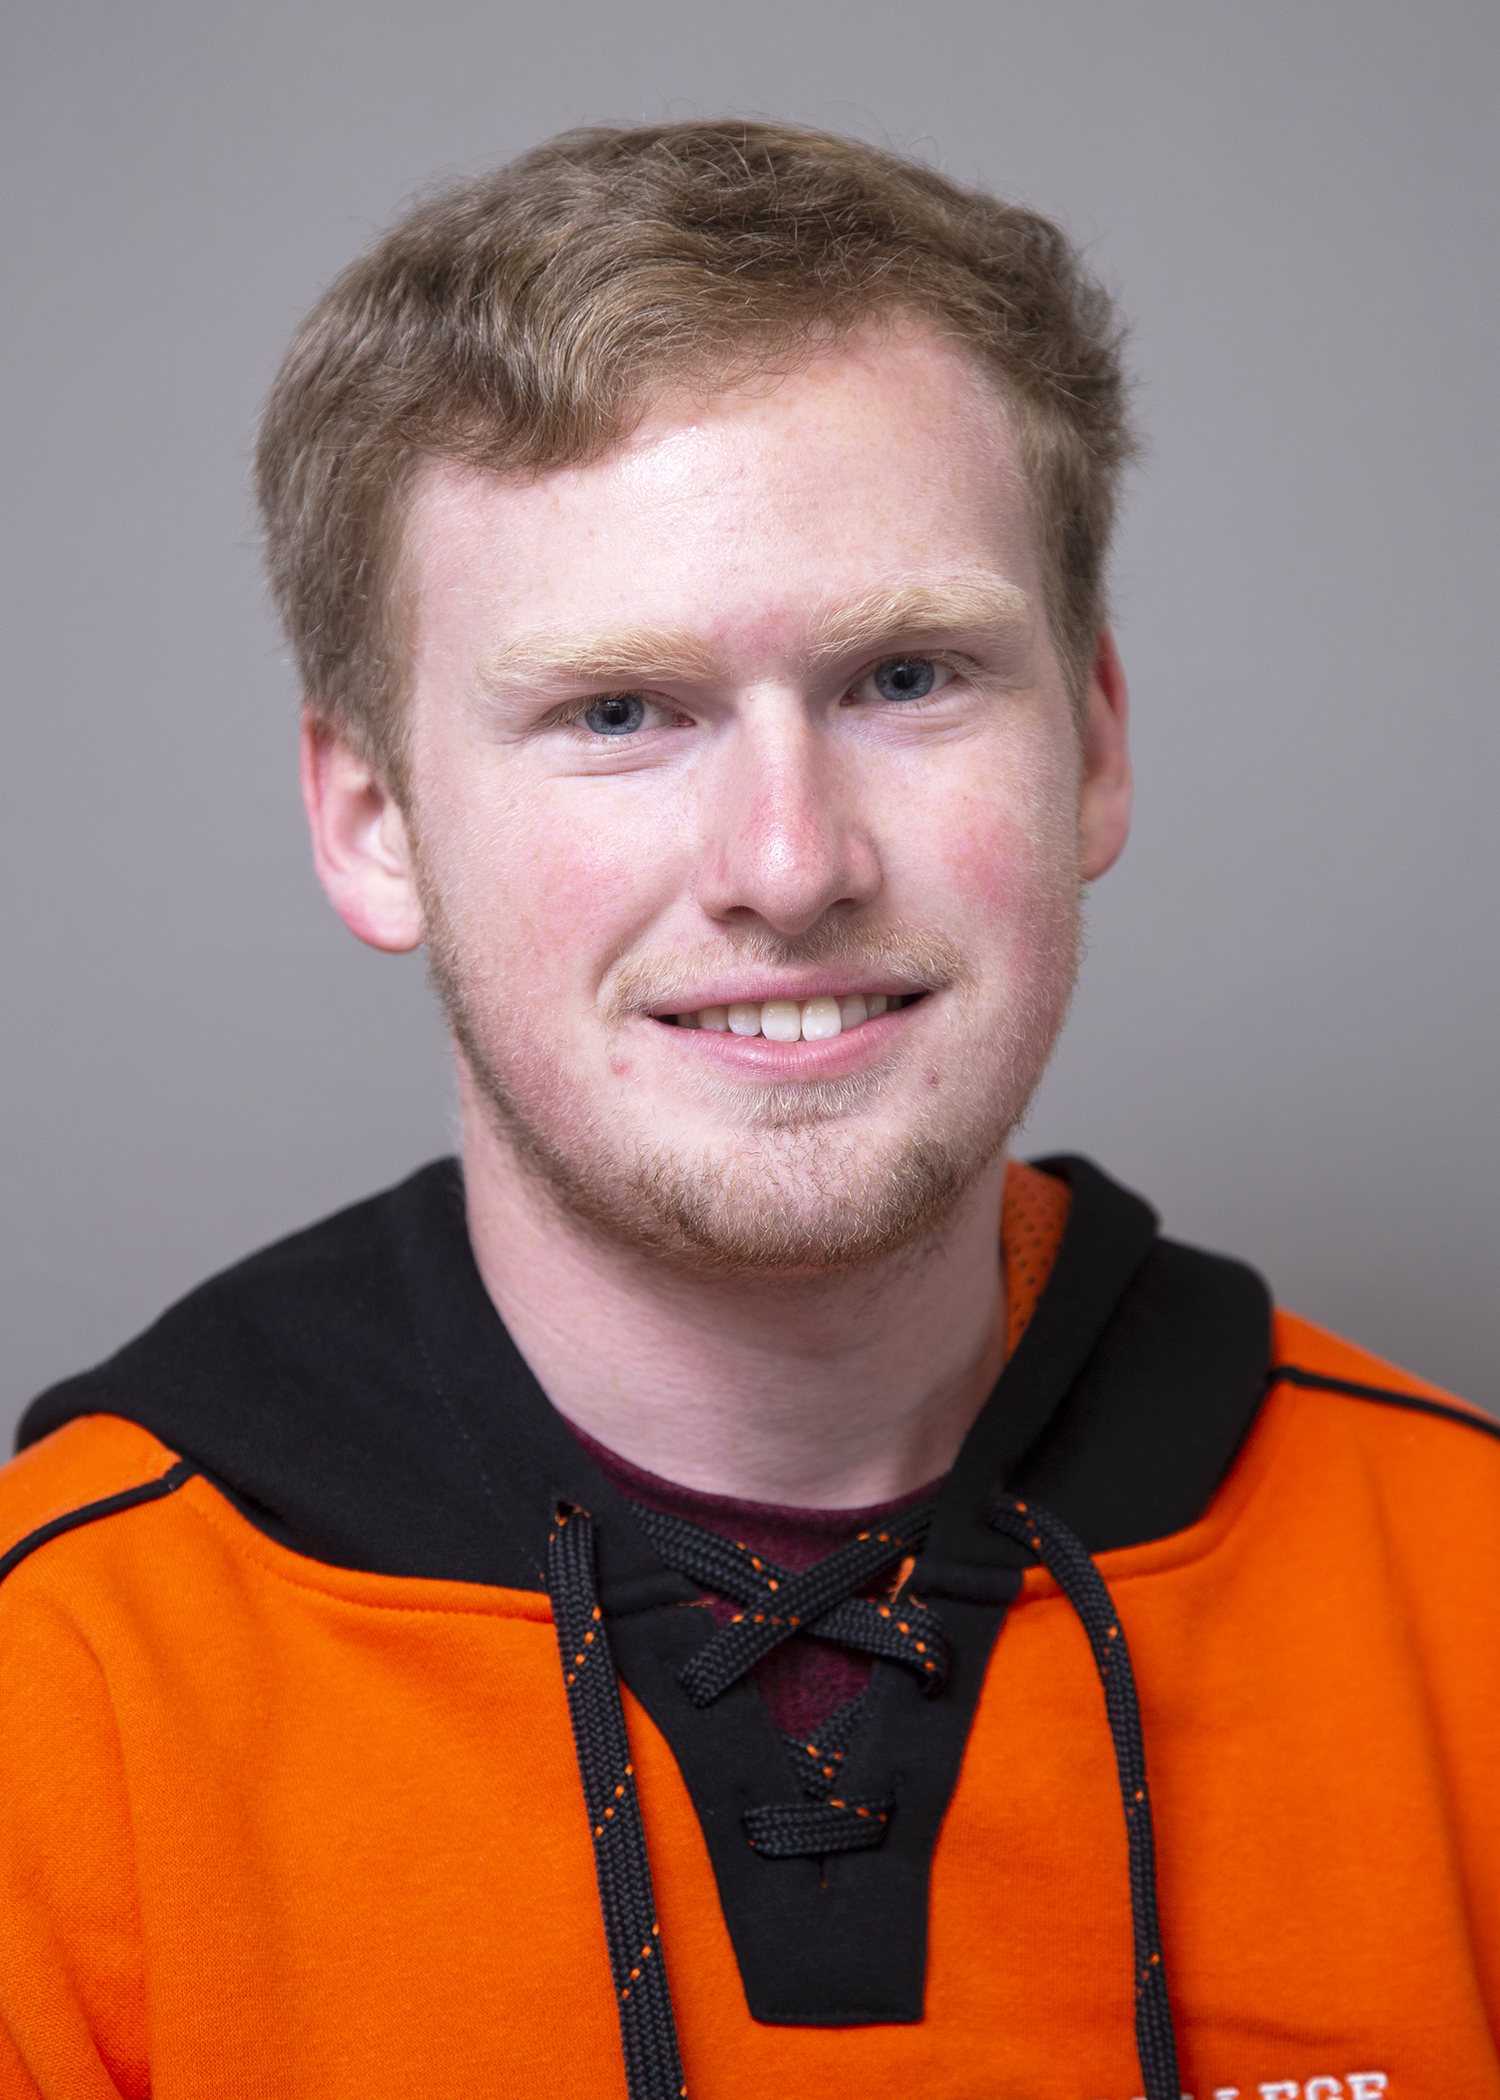 A headshot of Tanner Hester